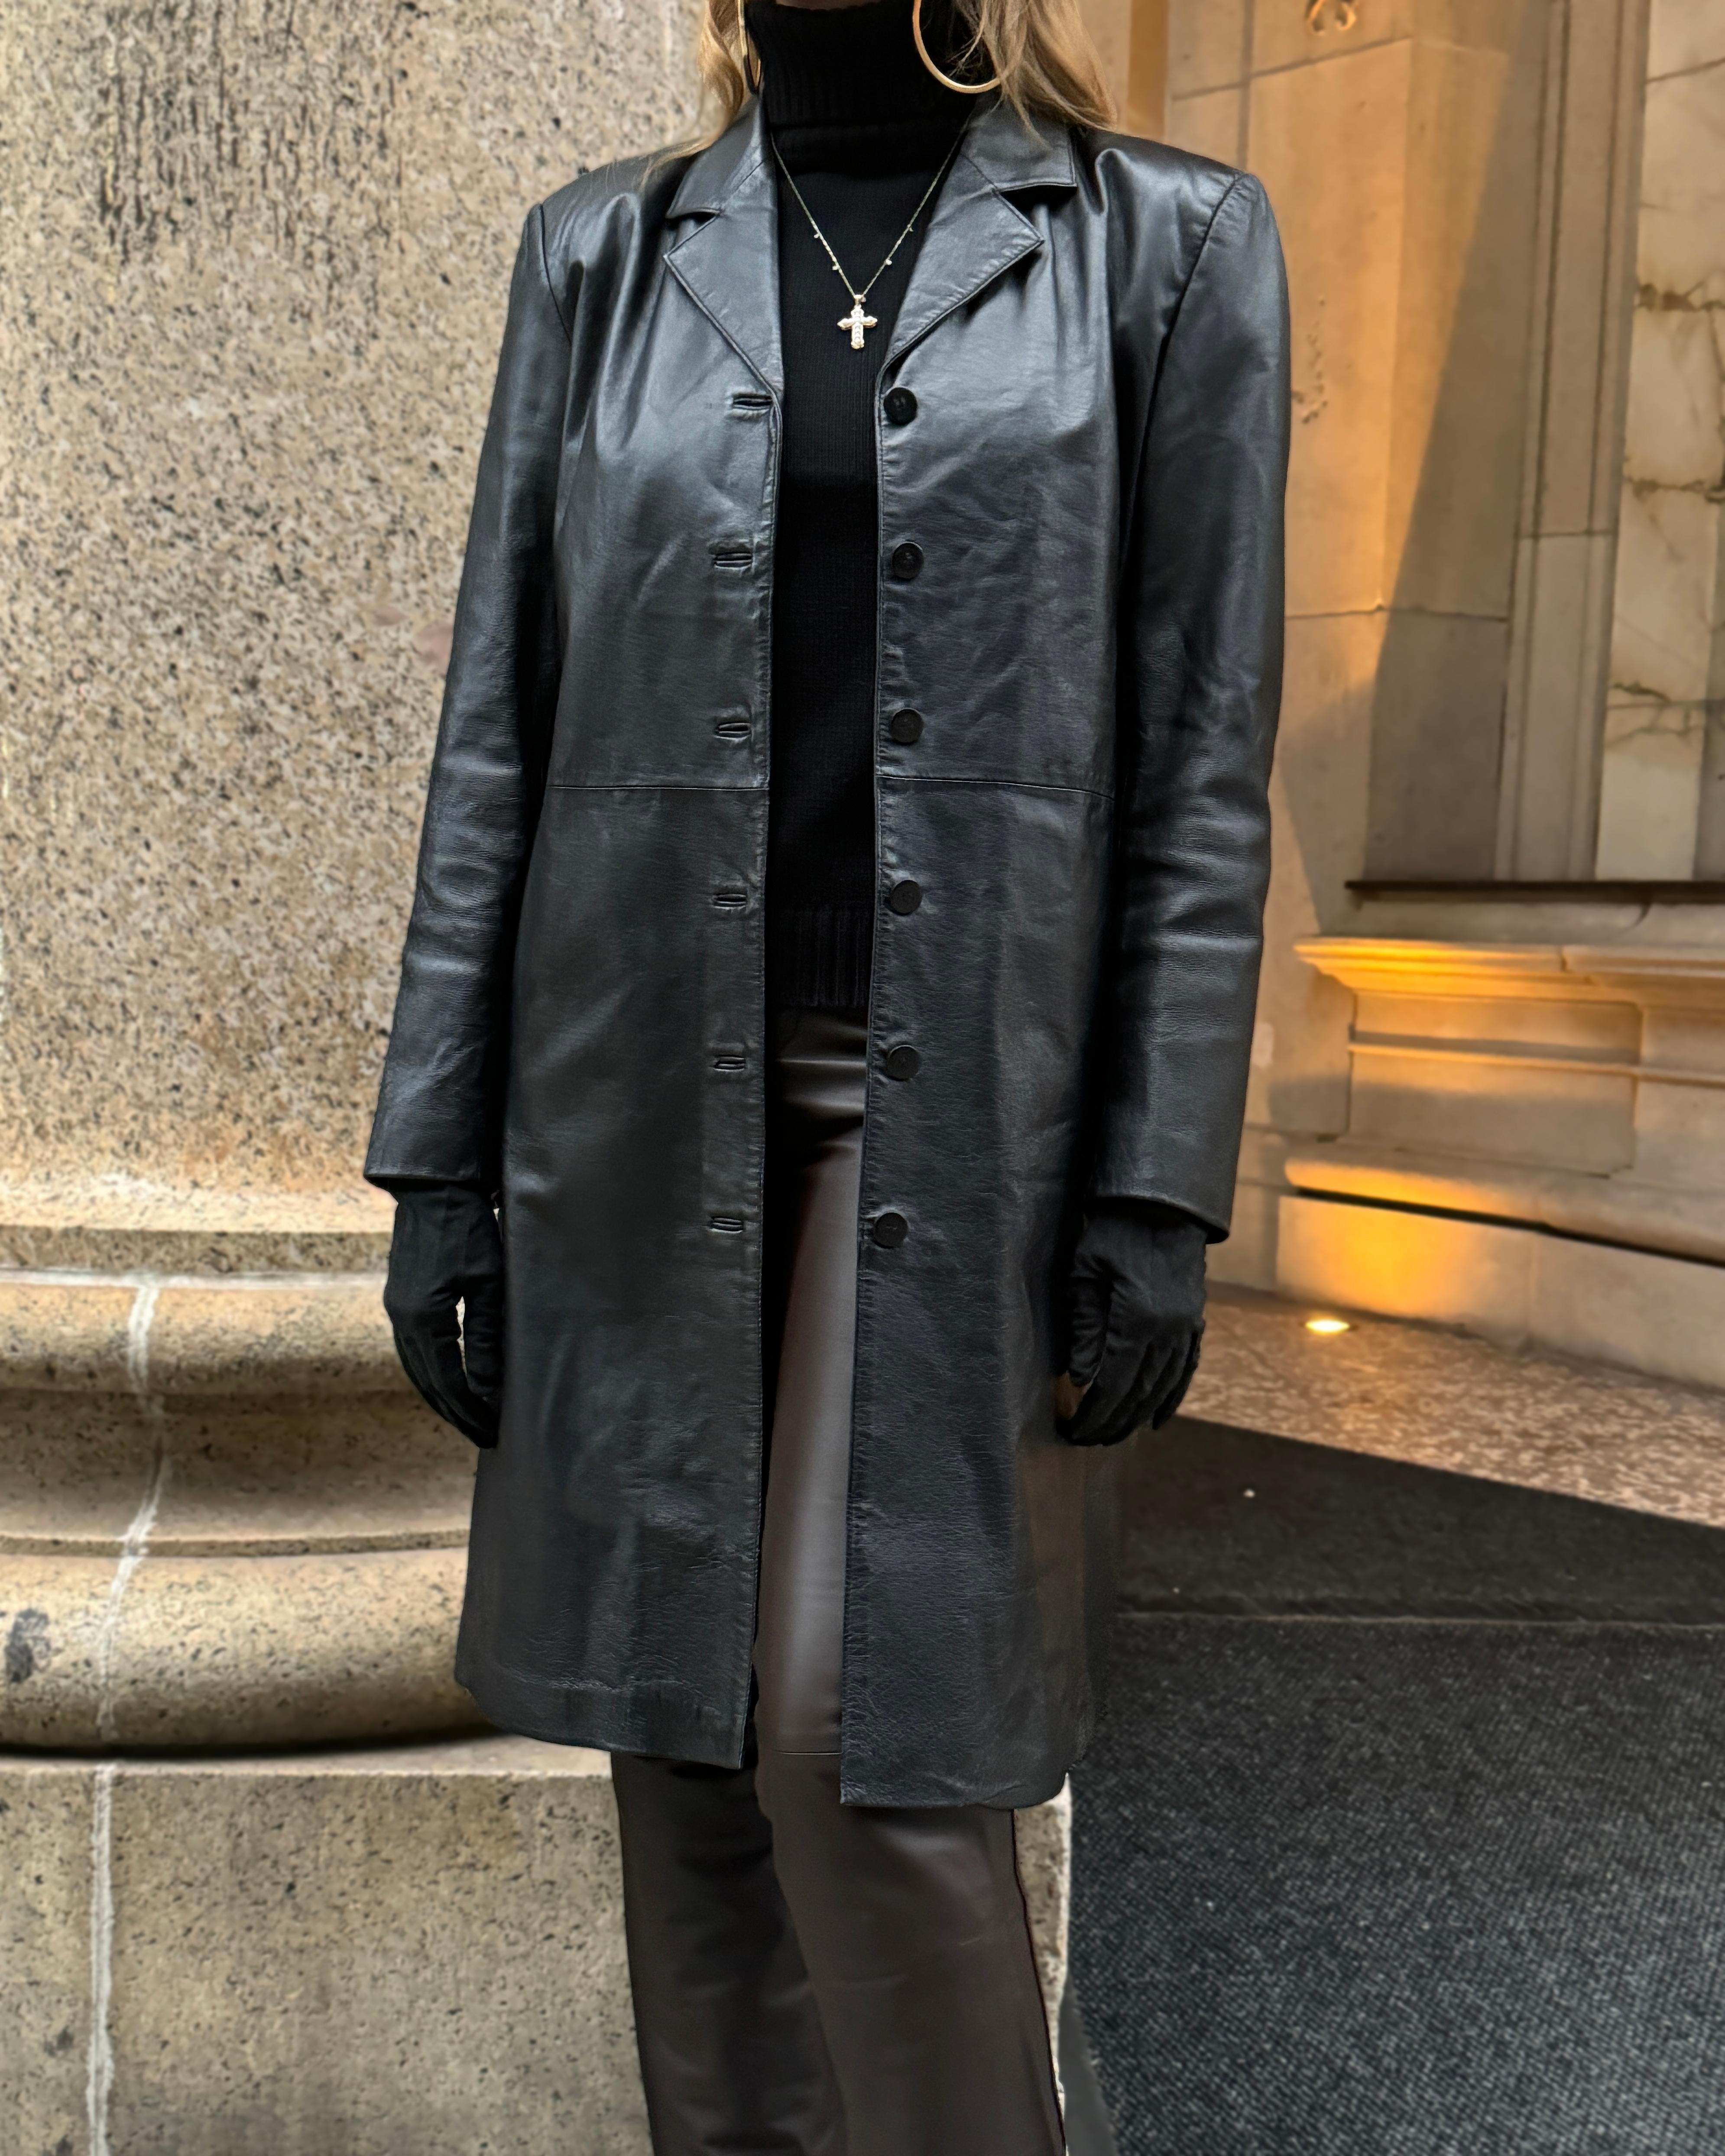 There is nothing more classic than a vintage black leather trench coat, and they were seen all over the Spring 2024 runways, making this piece especially on-trend at the moment. It is well-crafted of buttery soft leather and fully lined, with